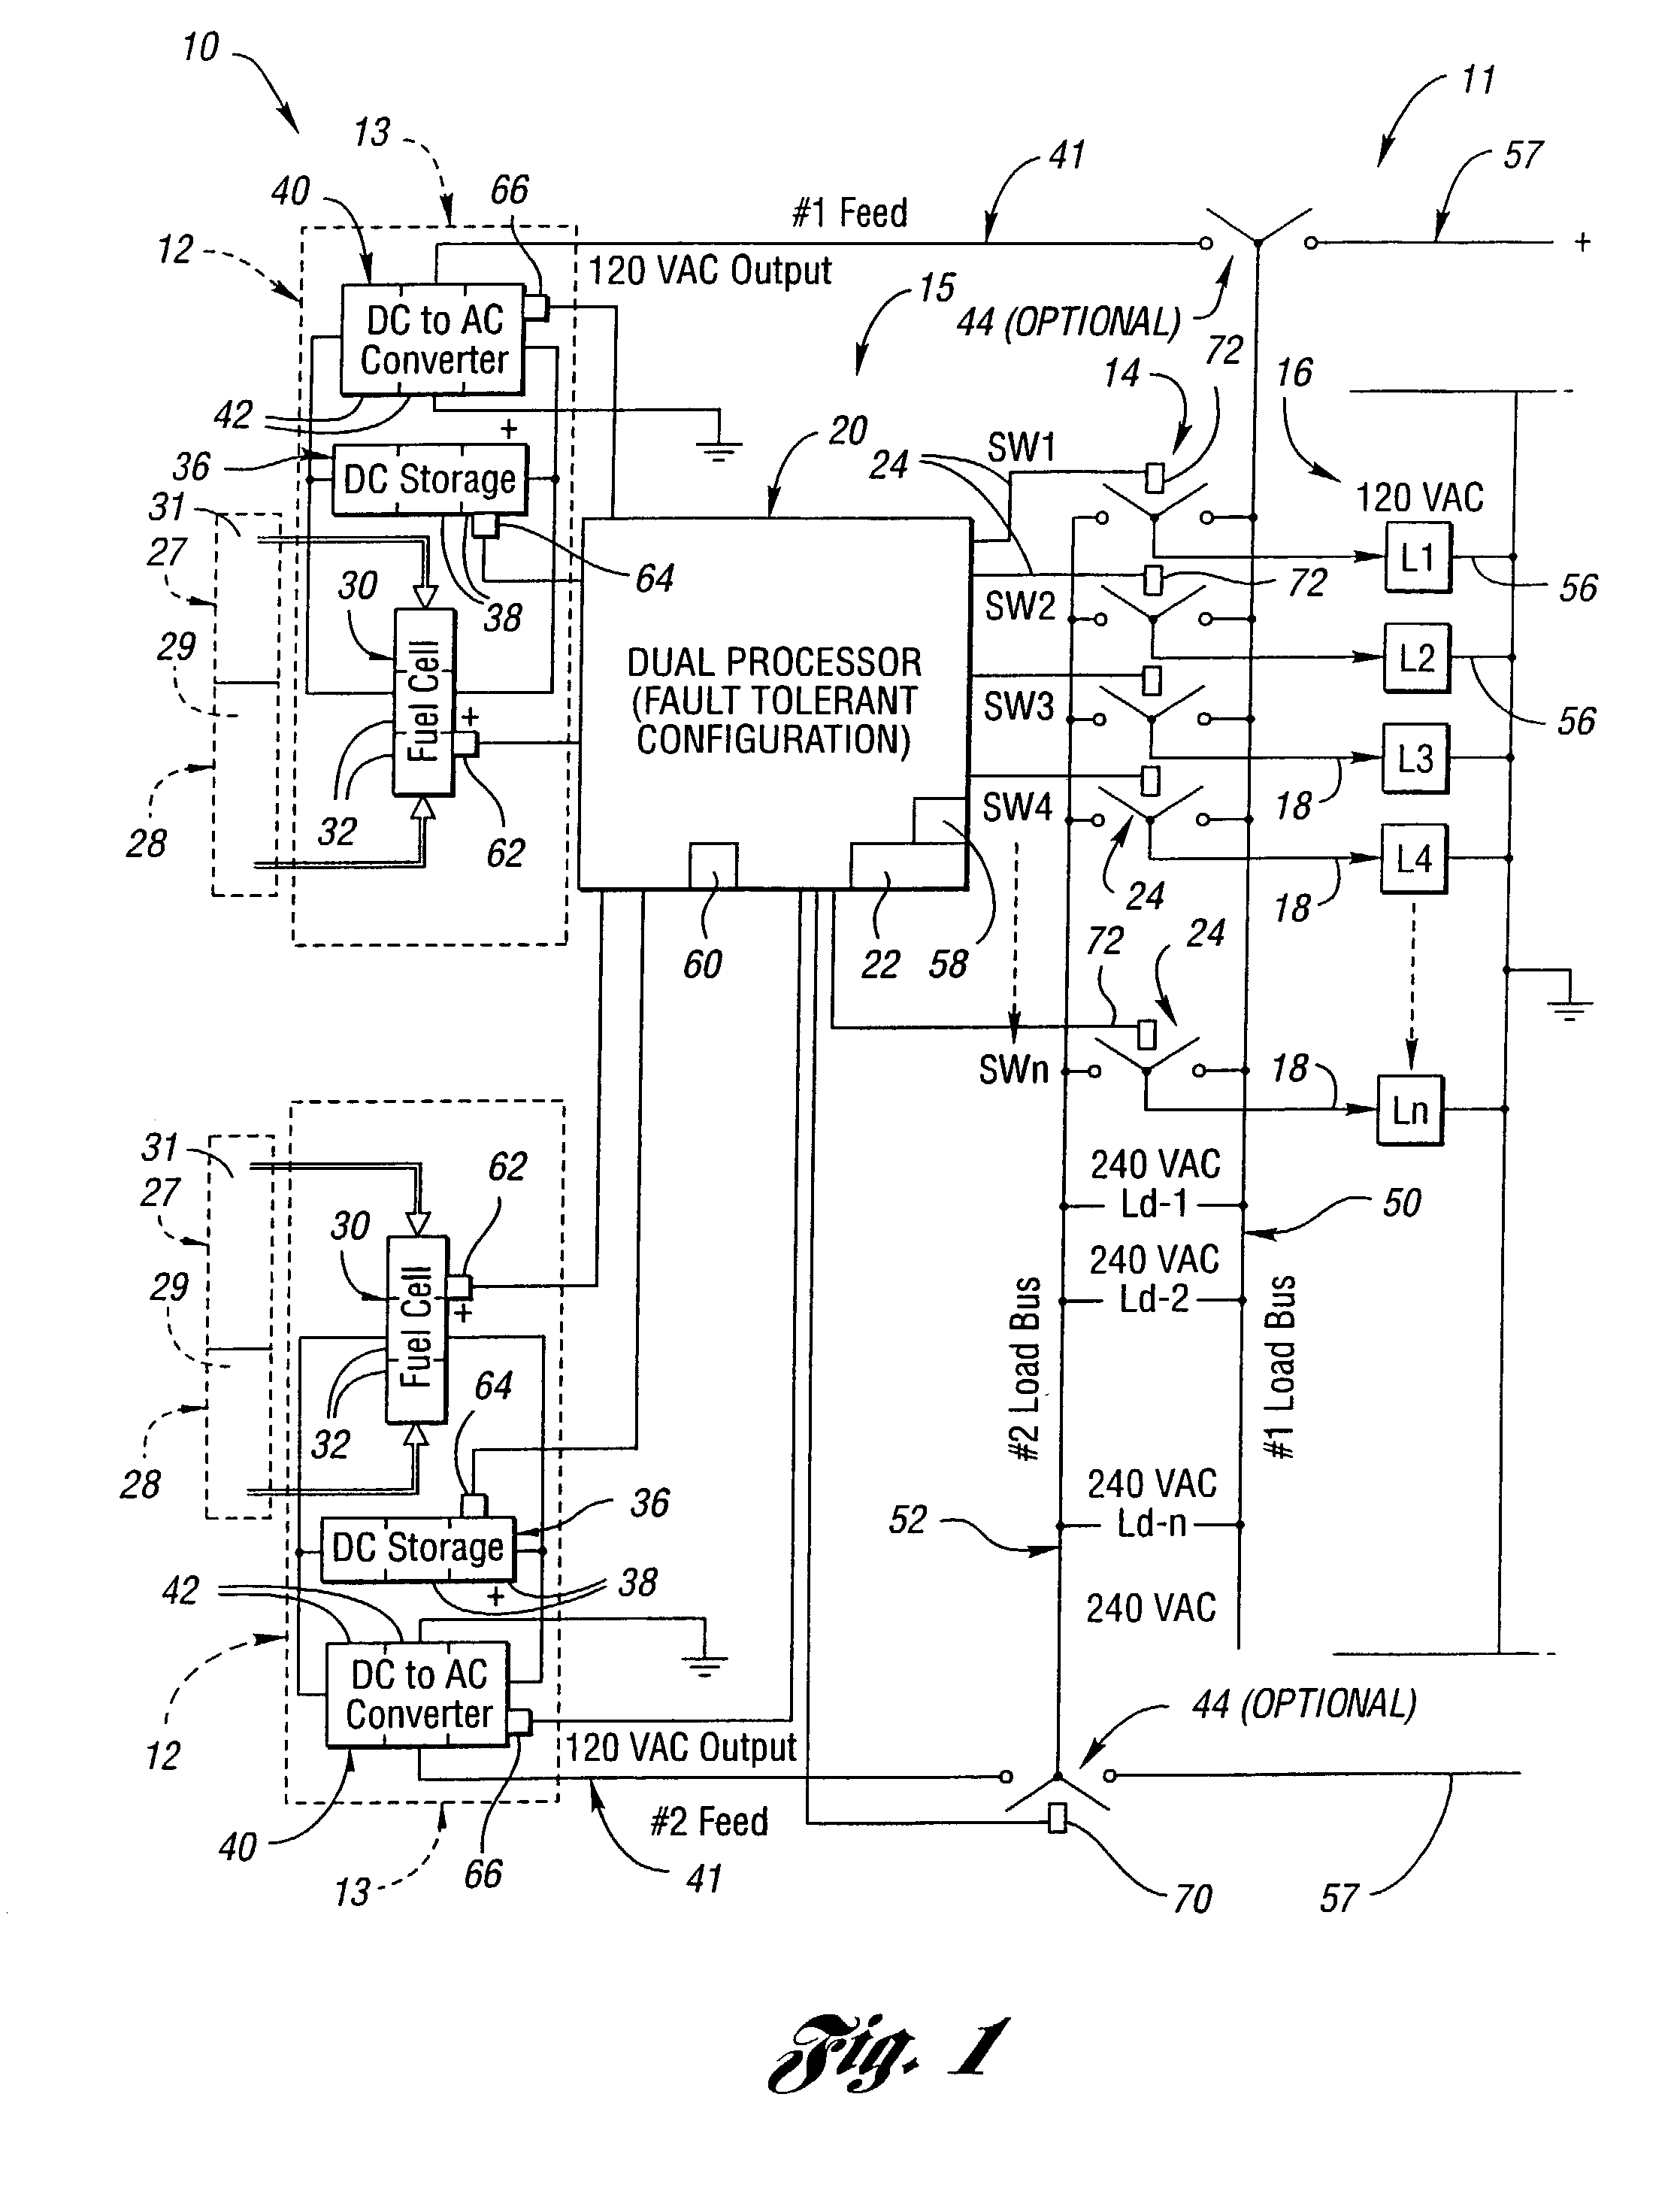 Variable fuel cell power system for generating electrical power